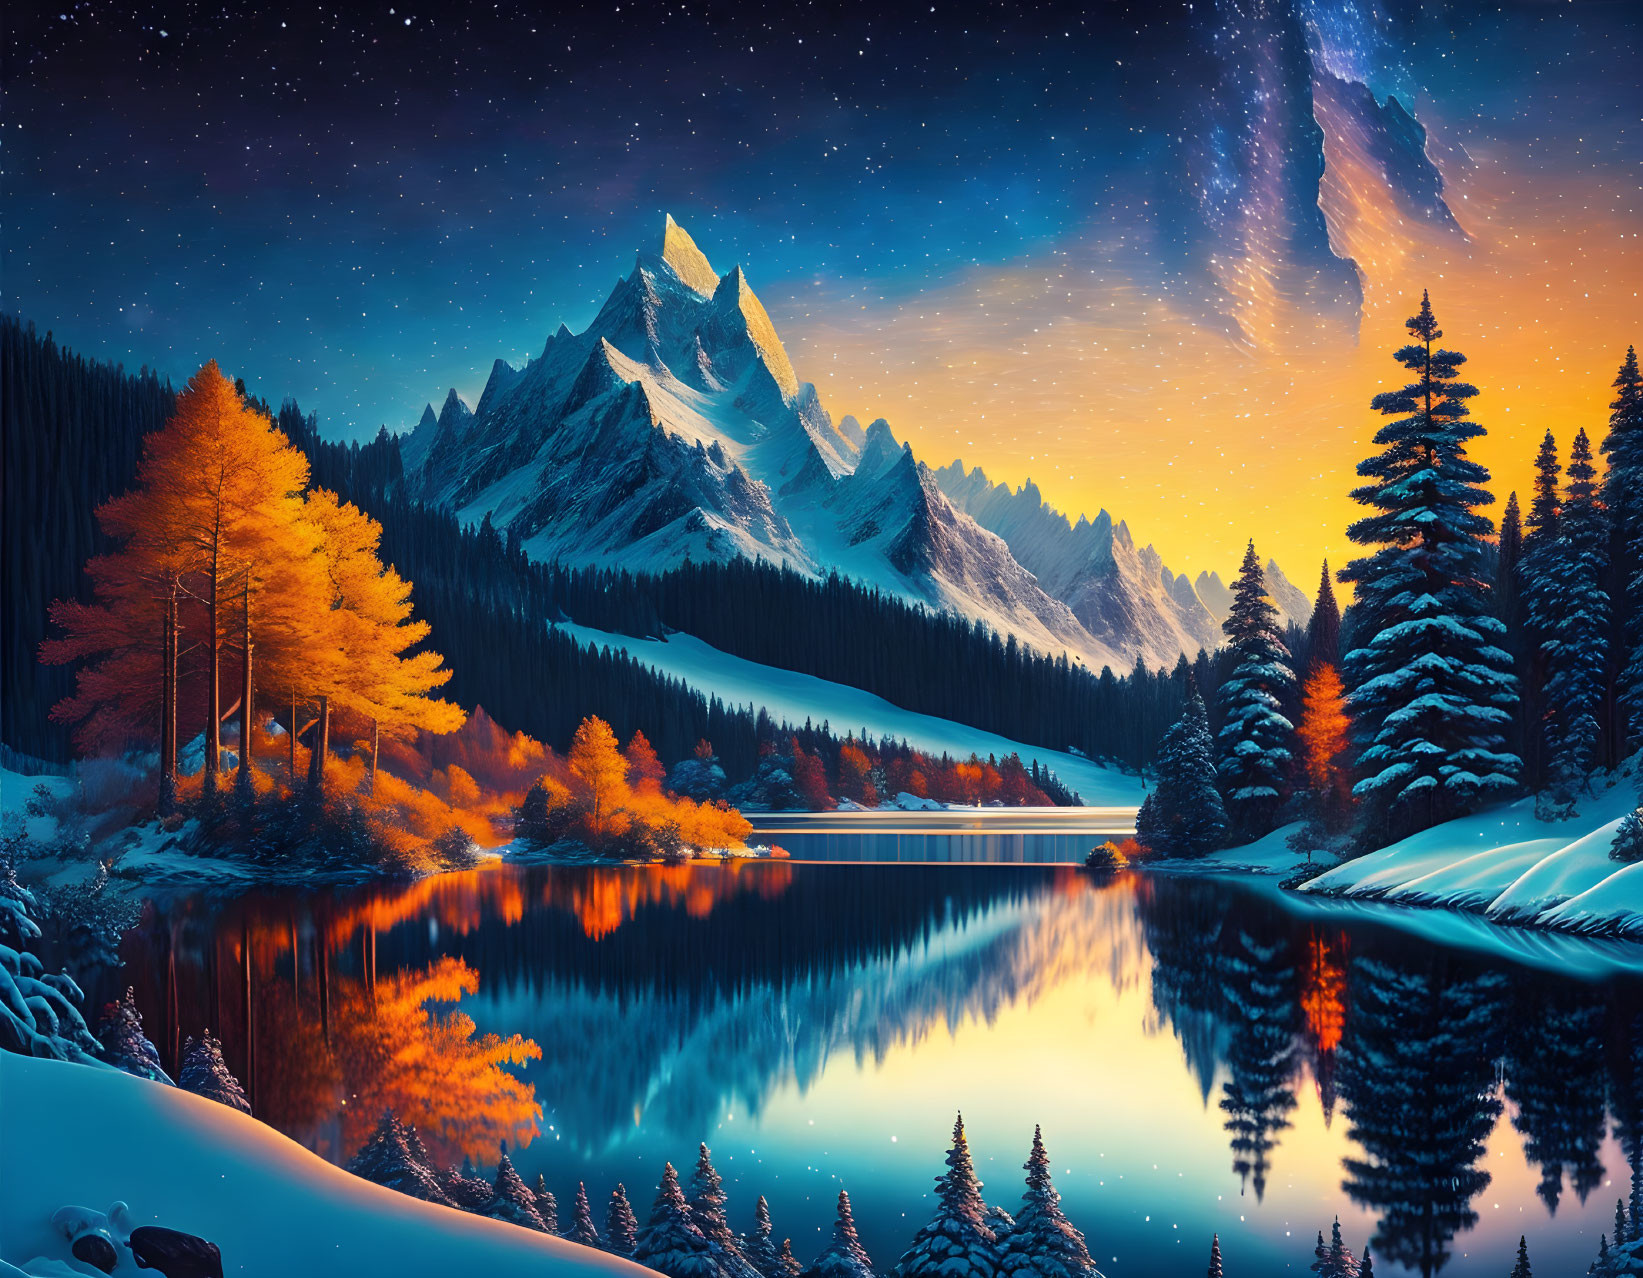 Winter Night Landscape: Reflective Lake, Snow-Covered Pines, Autumn Trees, Mountain,